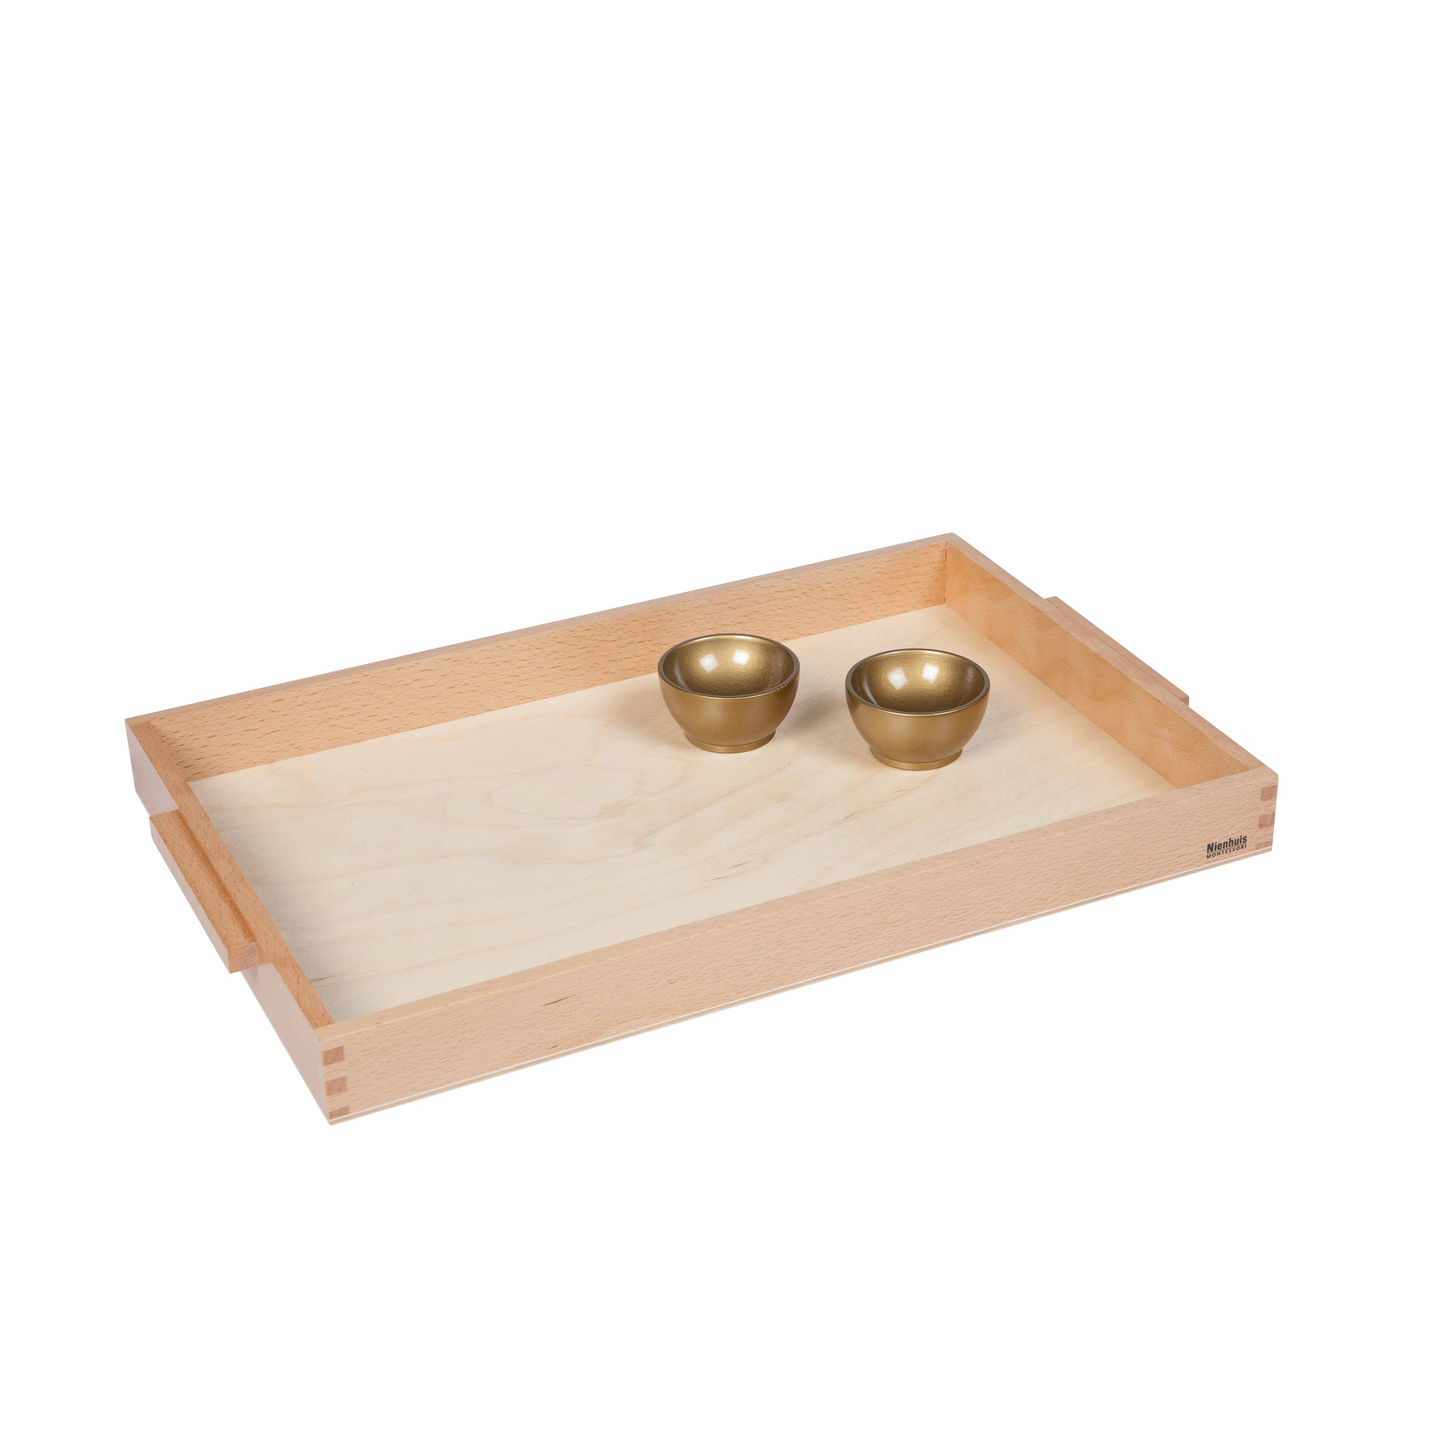 Wooden tray with 2 bowls - Nienhuis AMI